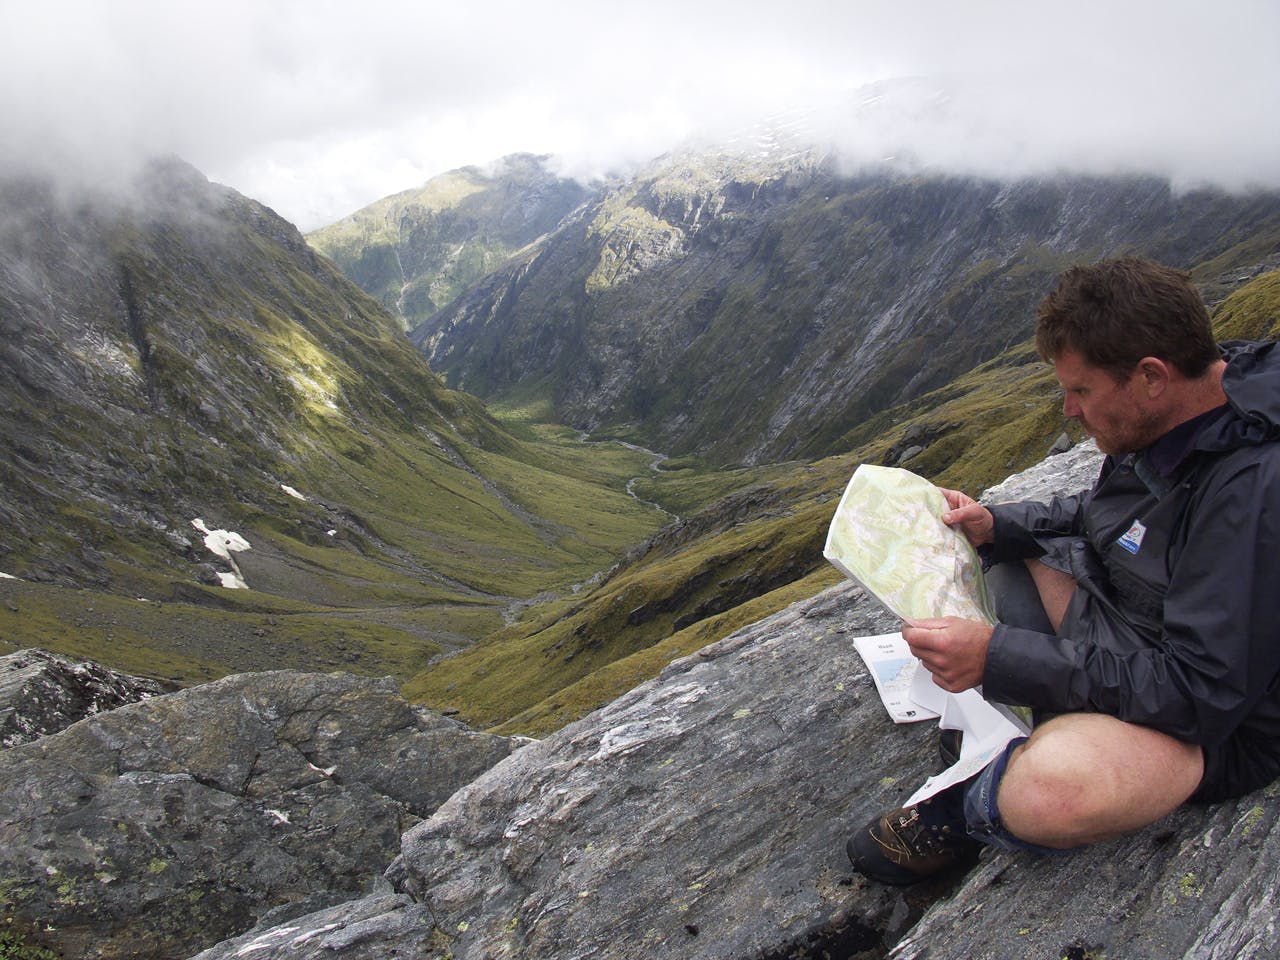 Clive sorting out topography in the head of the Macfarlane. Photo: Geoff Spearpoint